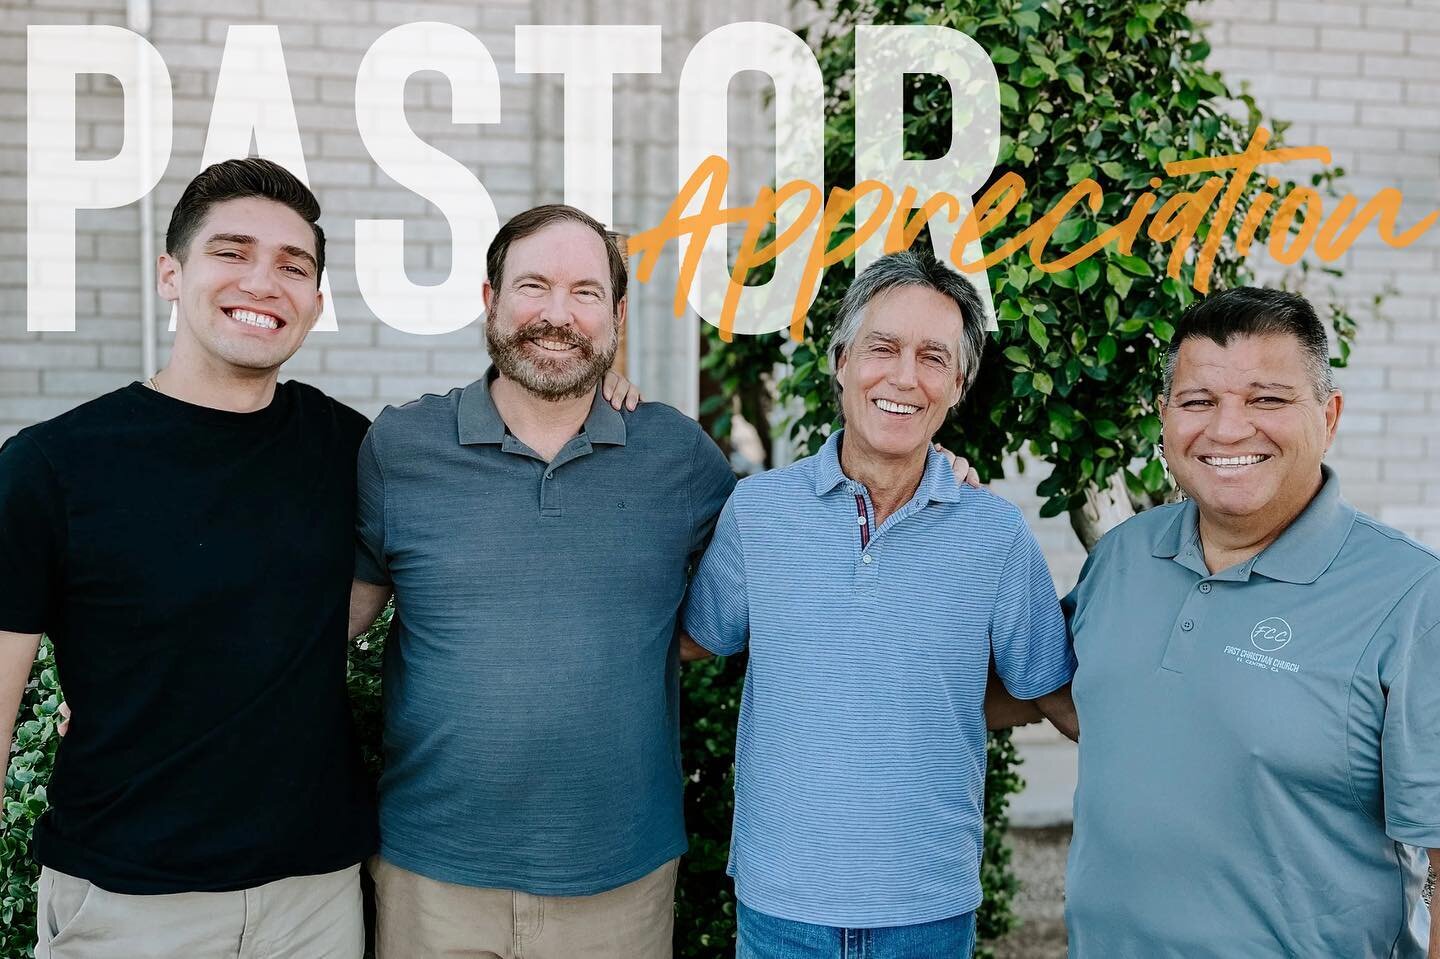 October is Pastor Appreciation Month! 🤝

We are so thankful for our Pastoral staff her at FCC! We thank you for faithfully shepherding, preaching the Word boldly, and serving God&rsquo;s people with heart. With your leadership and ministries we are 